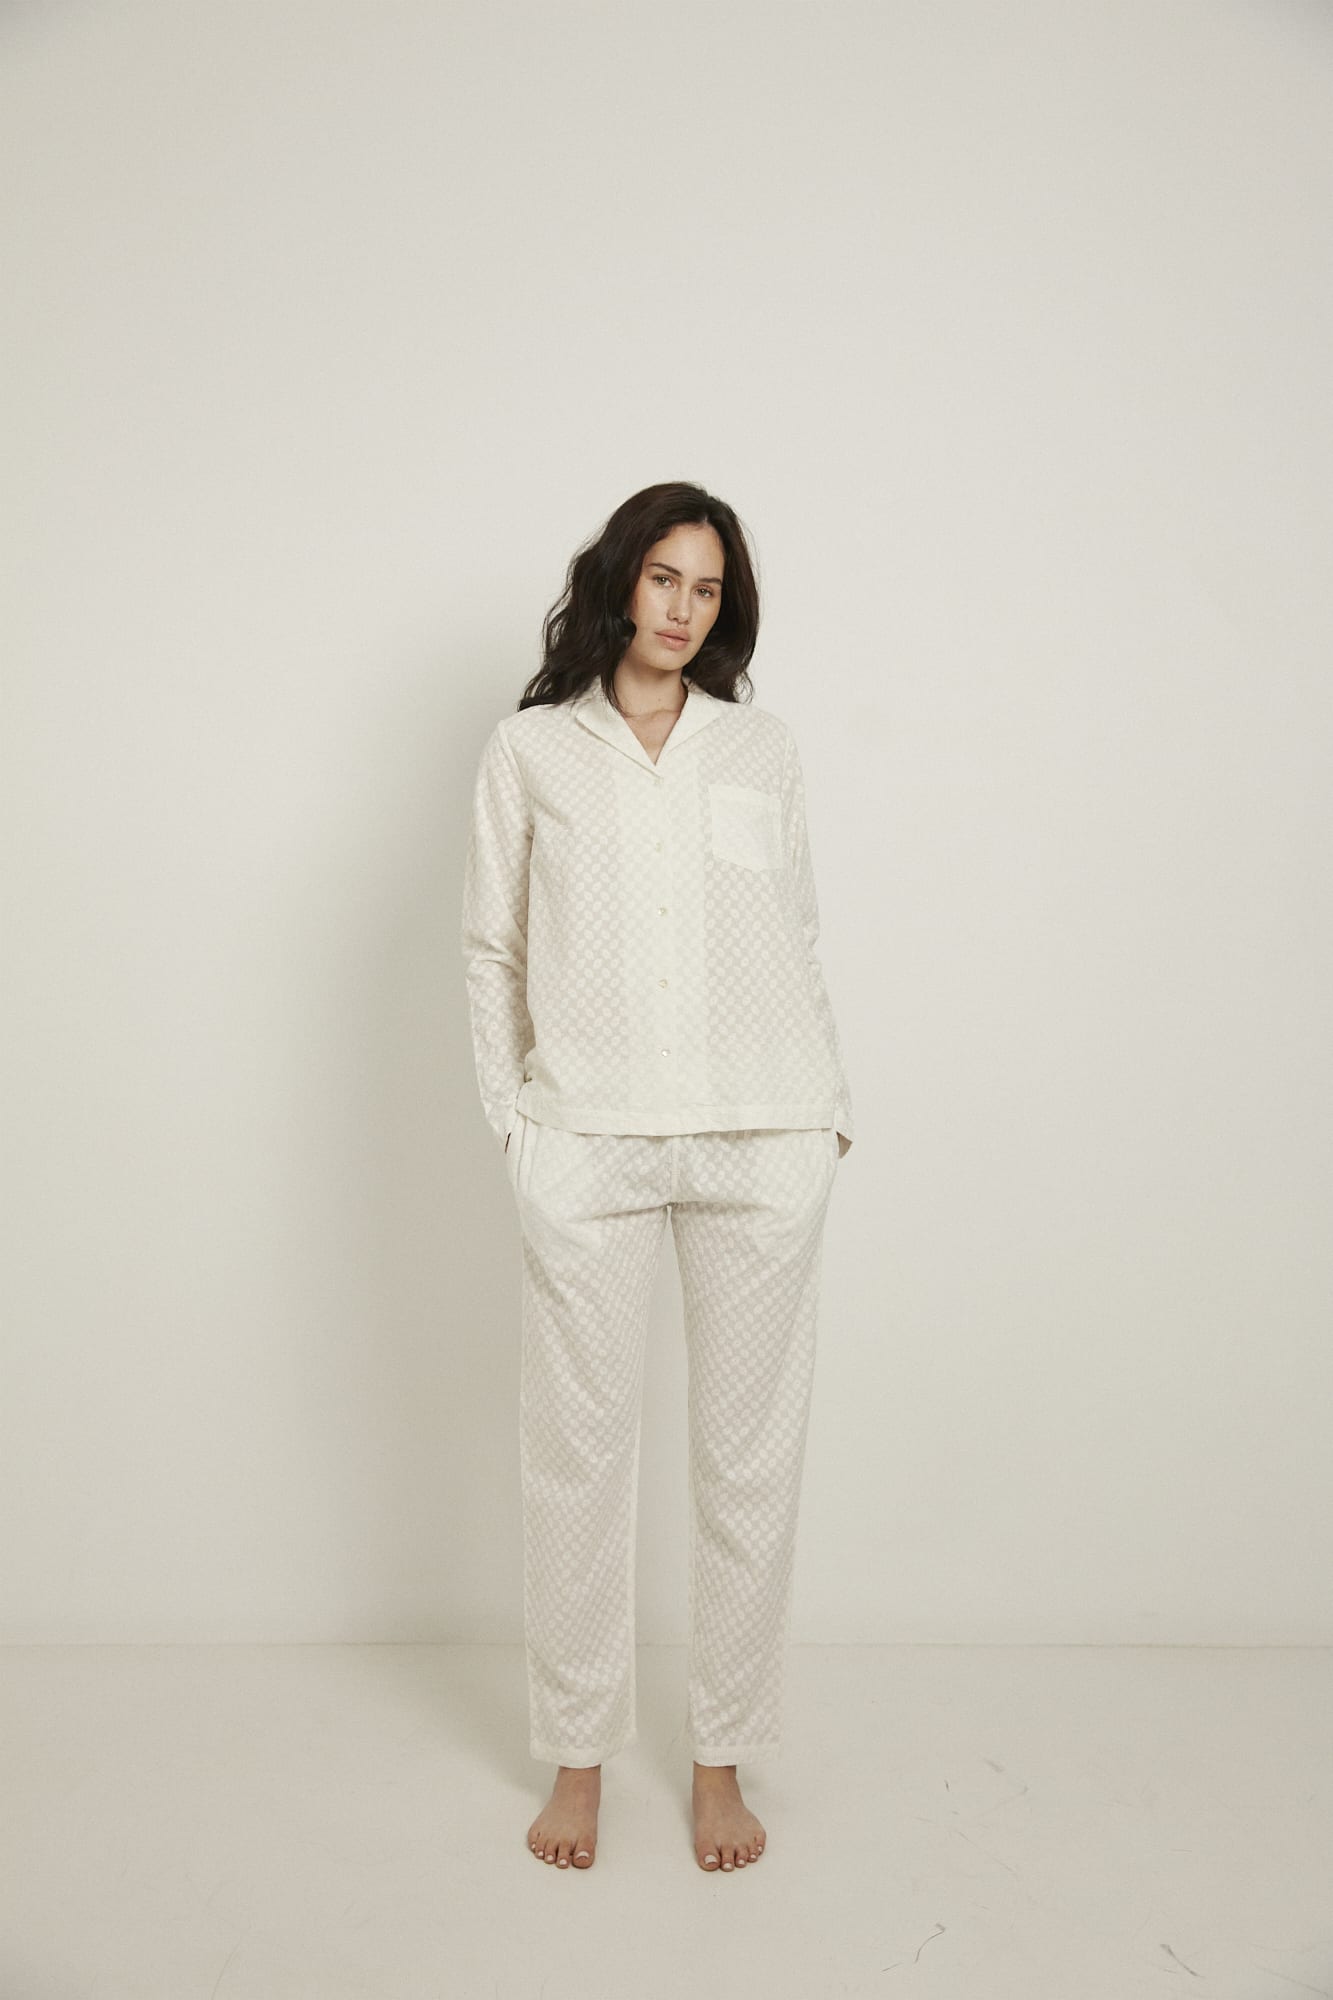 Women’s pyjama set including a long sleeve shirt and long sleeve pants. Made from 100% organic cotton, in white colour featuring delicate all over embroidery. The shirt has natural shell buttons, a front pocket and a back pleat.  The pants feature an elasticated waistband for comfort.  